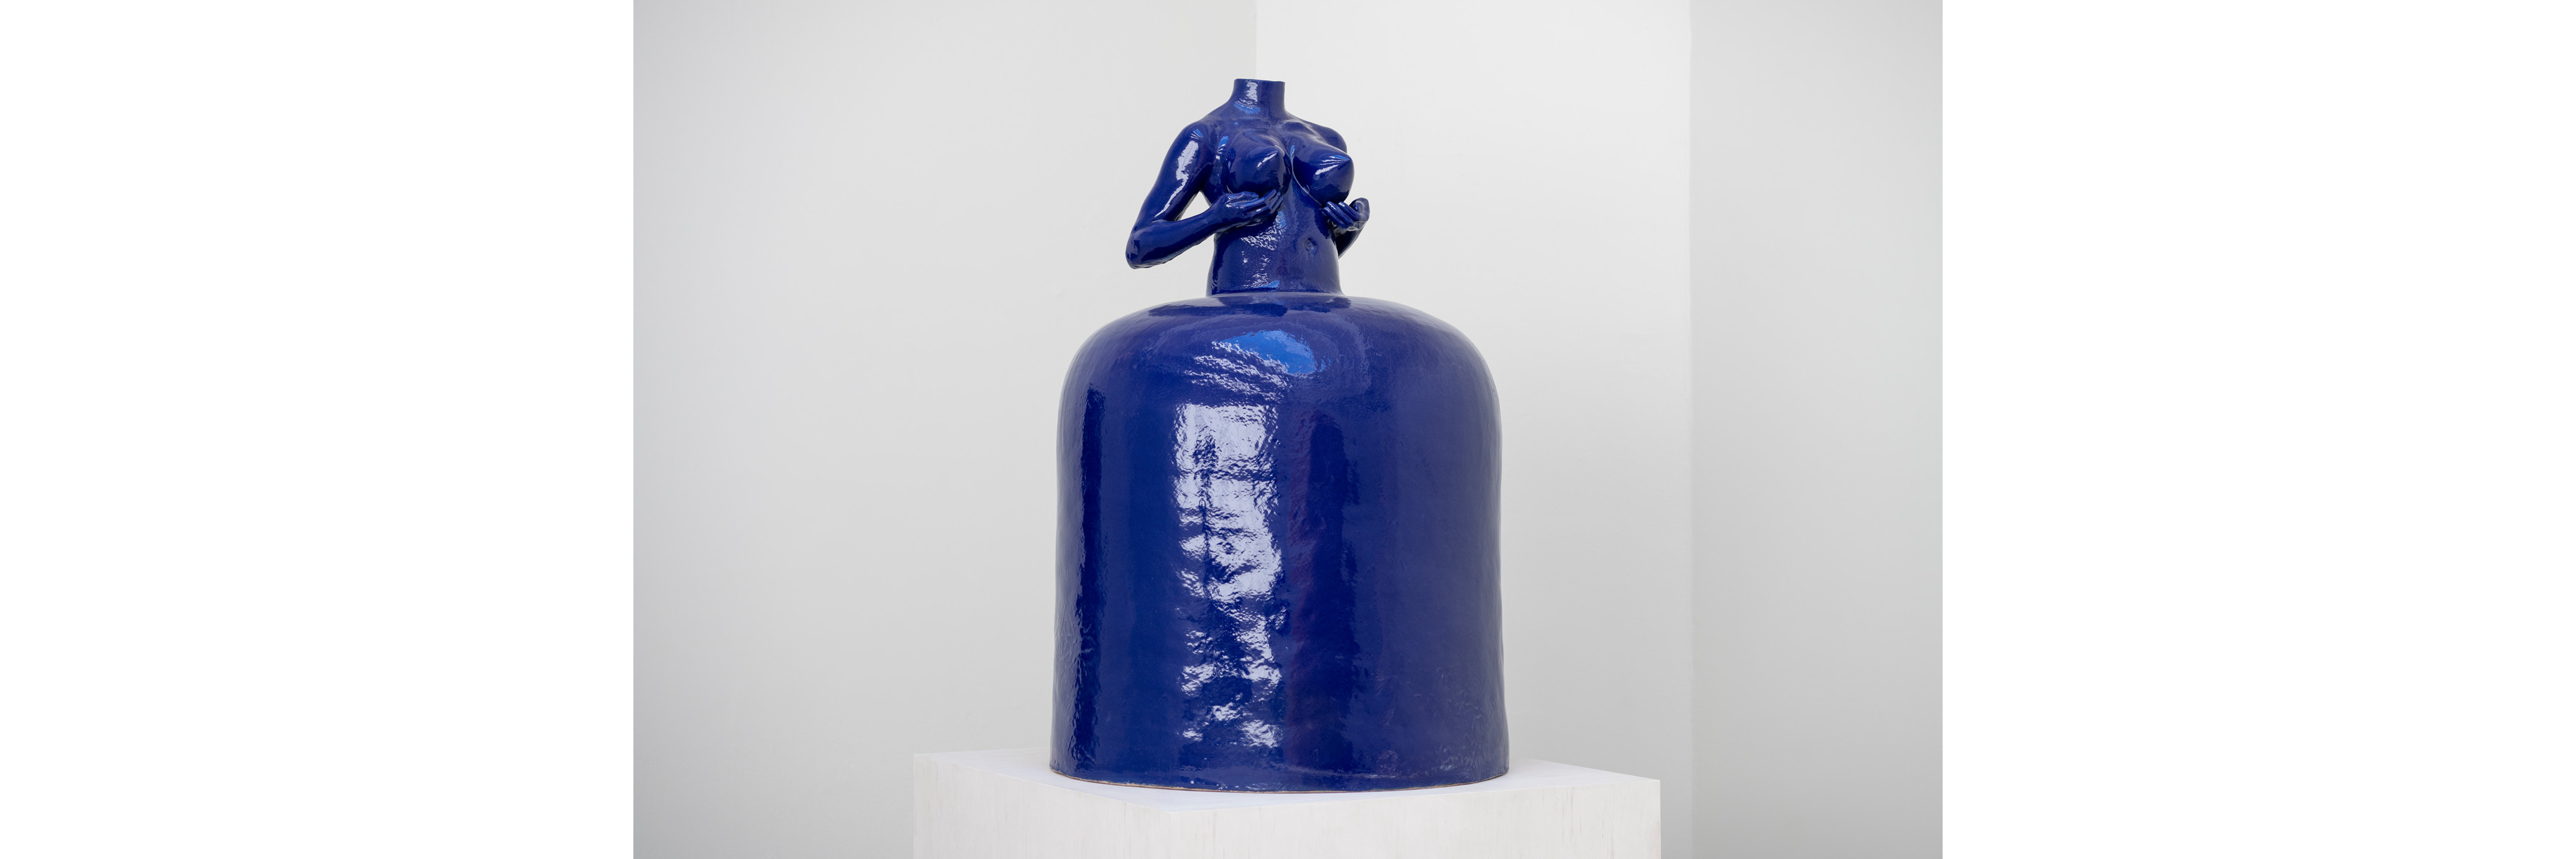 Simone Leigh, Martinique, 2022, stoneware, 60 3/4 × 41 1/4 × 39 3/4 inches (154.3 × 104.8 × 101 cm), courtesy of the artist and Matthew Marks Gallery, © Simone Leigh, photo by Timothy Schenck